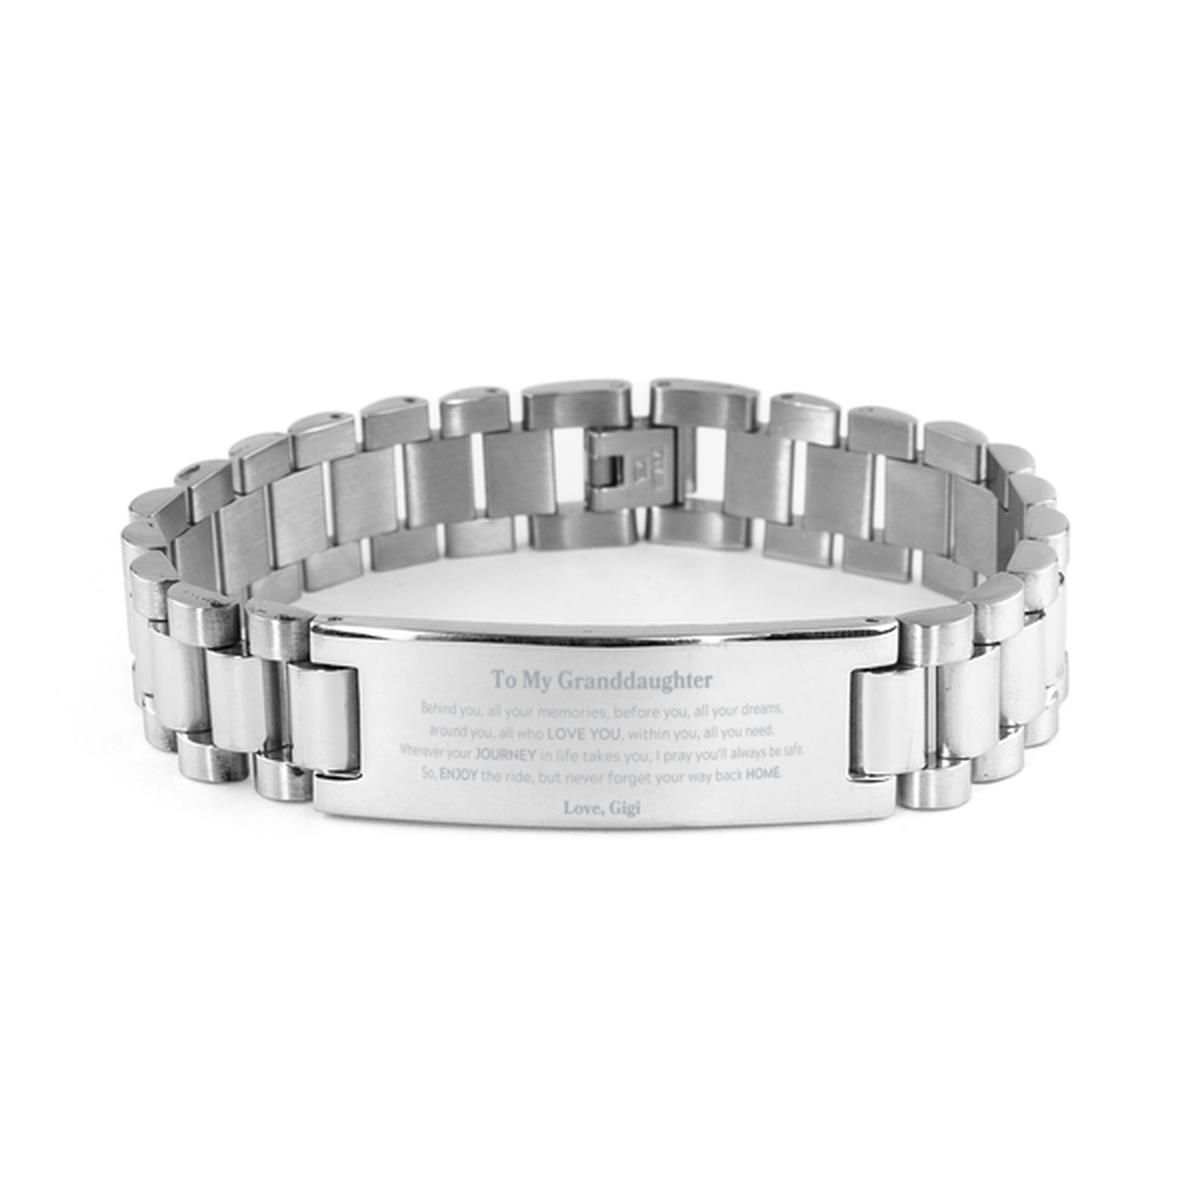 To My Granddaughter Graduation Gifts from Gigi, Granddaughter Ladder Stainless Steel Bracelet Christmas Birthday Gifts for Granddaughter Behind you, all your memories, before you, all your dreams. Love, Gigi